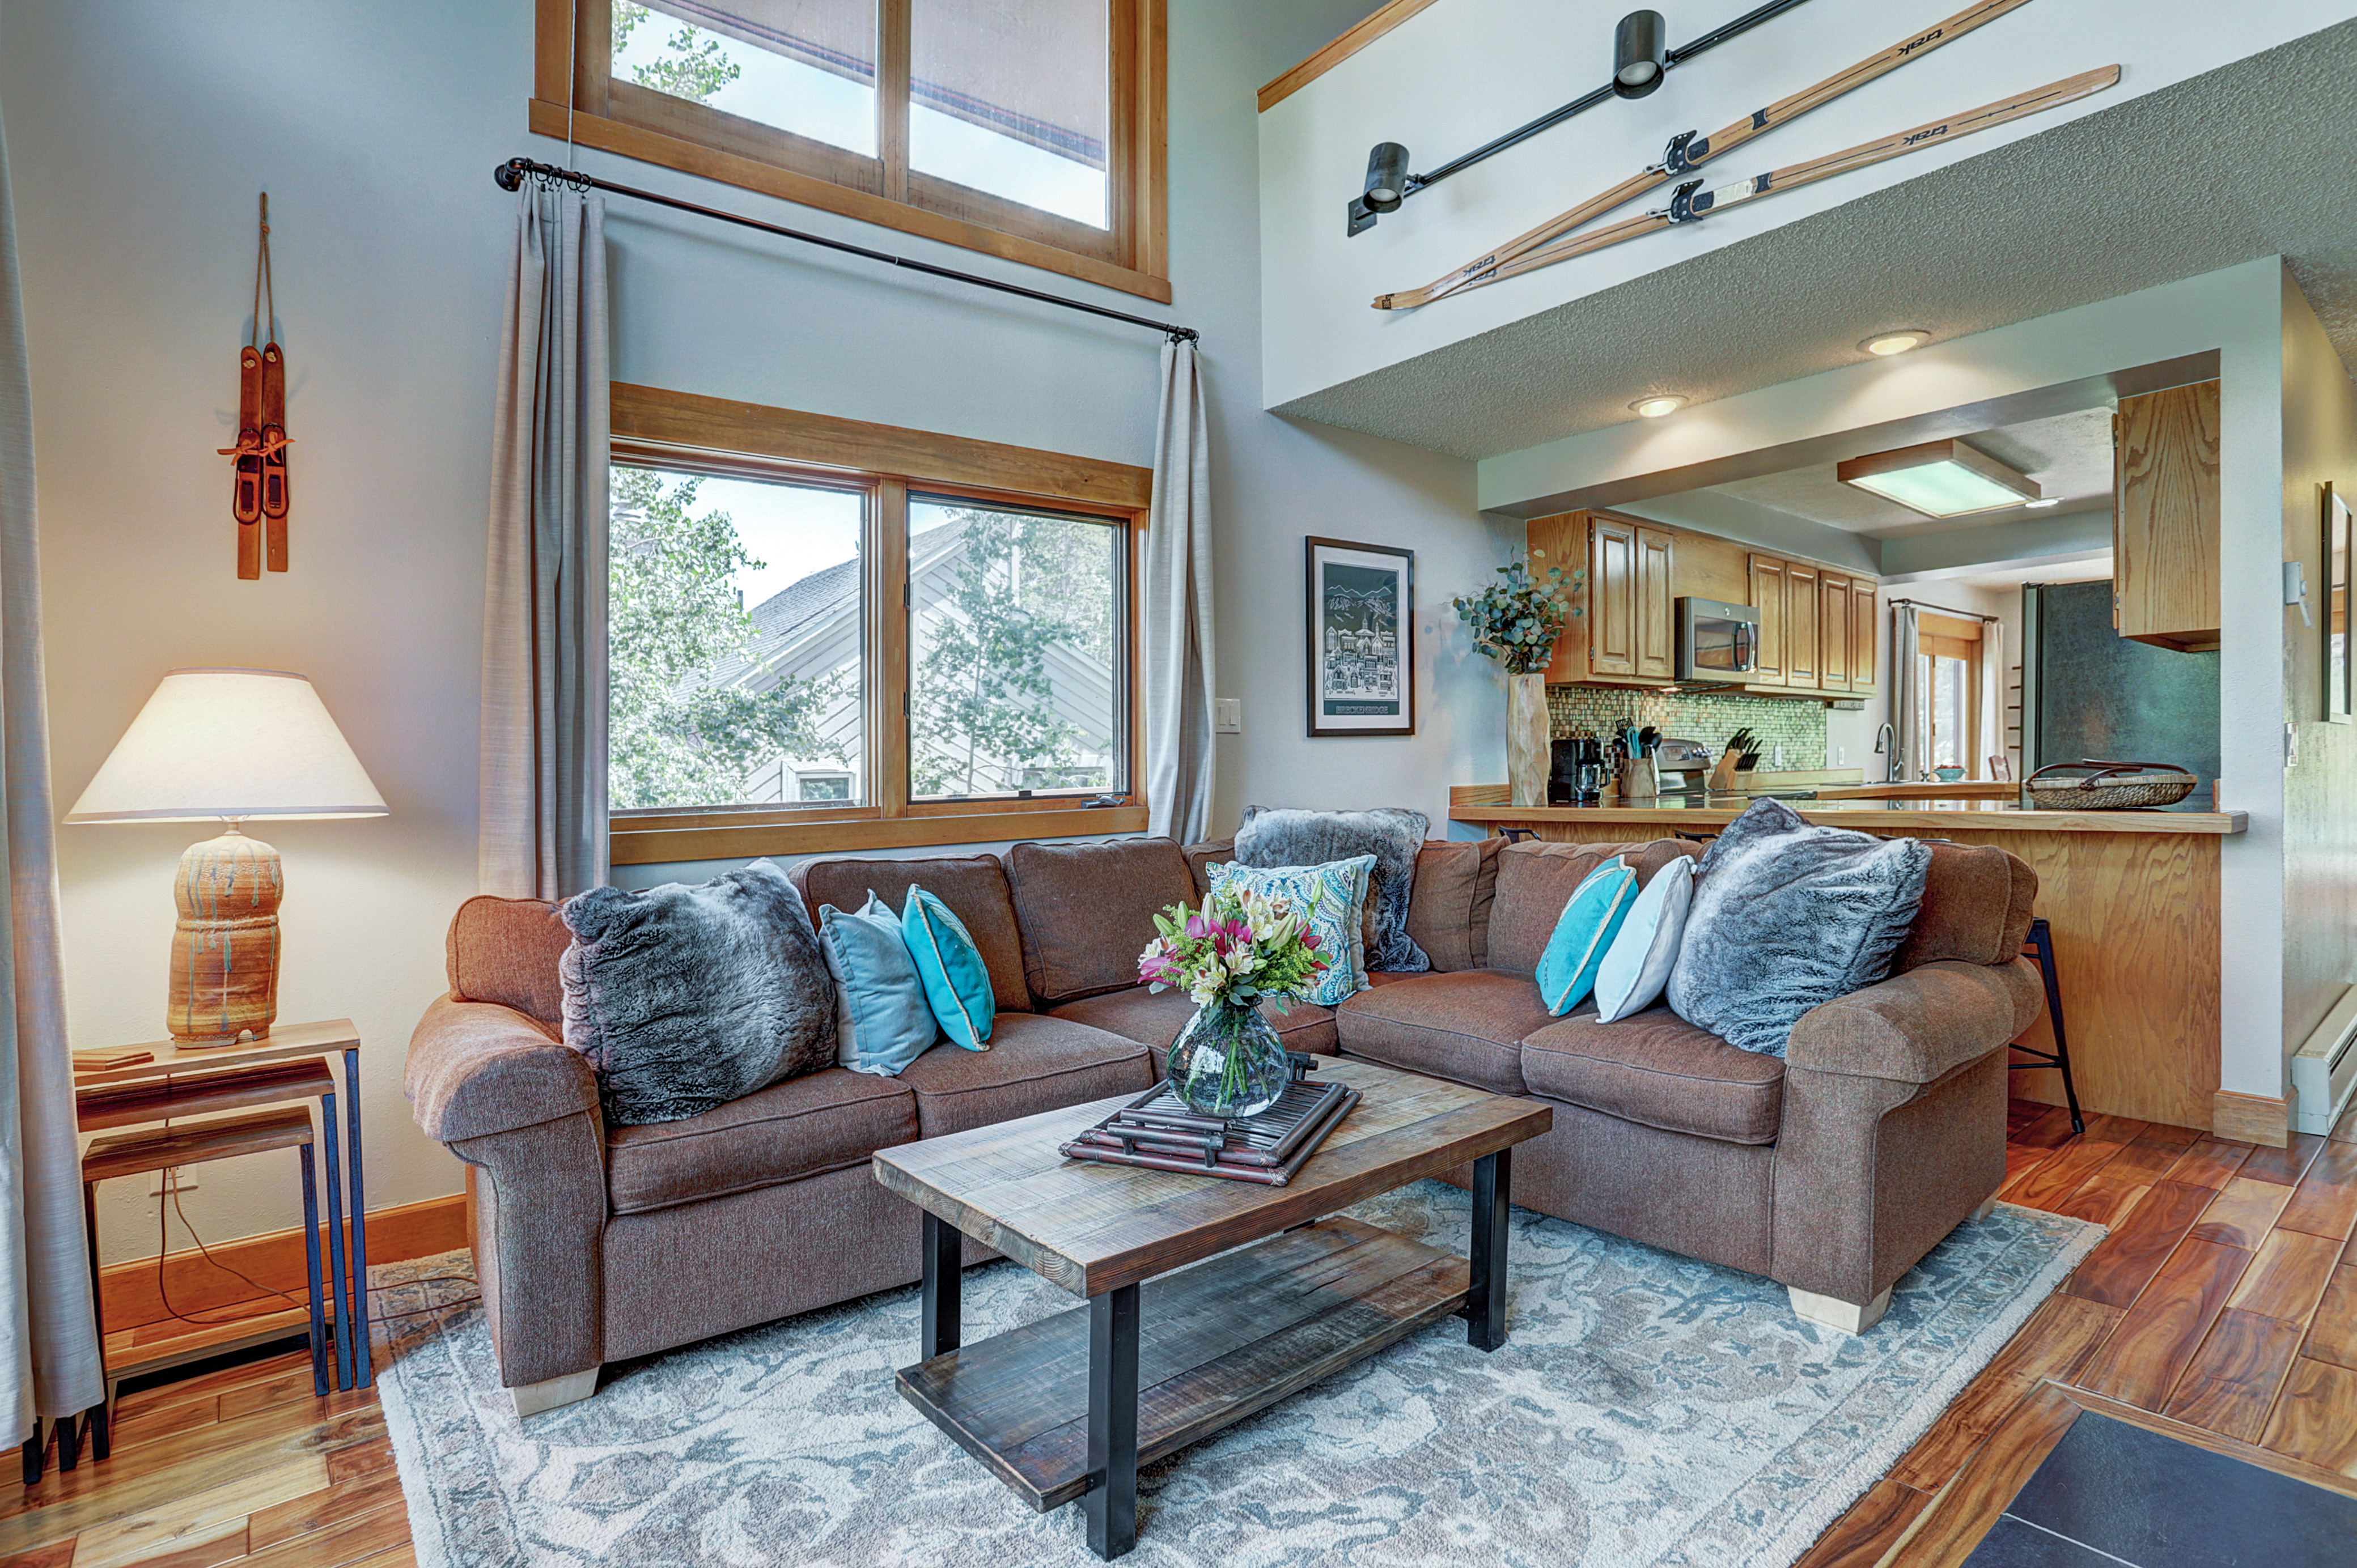 Sophie Chalet sits 1 mile from Main Street and the slopes of Breckenridge.